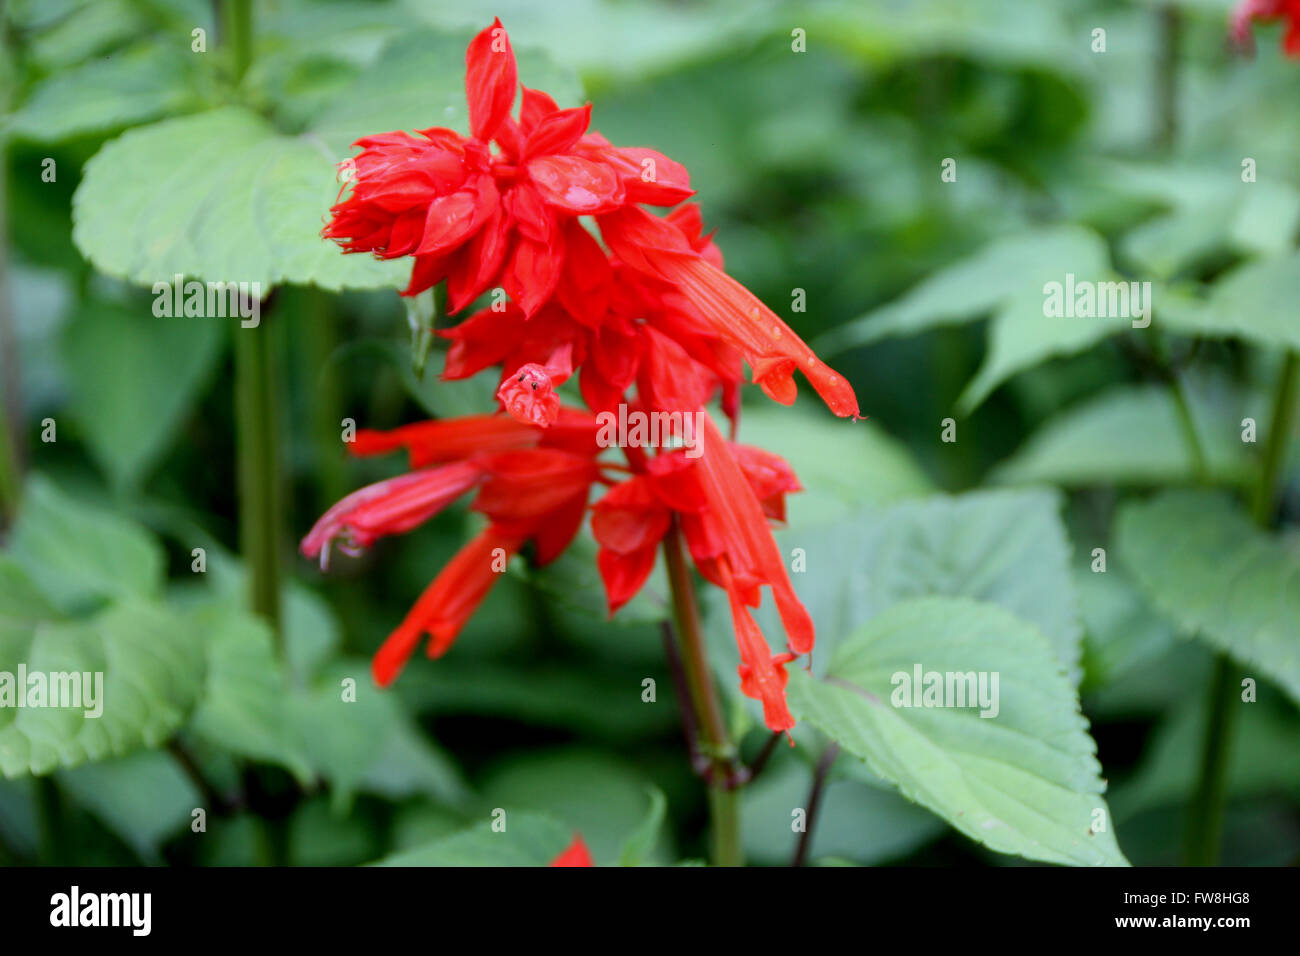 Salvia splendens, Scarlet sage, tropical sage, cultivated ornamental herb with opposite ovate leaves and scarlet flowers Stock Photo